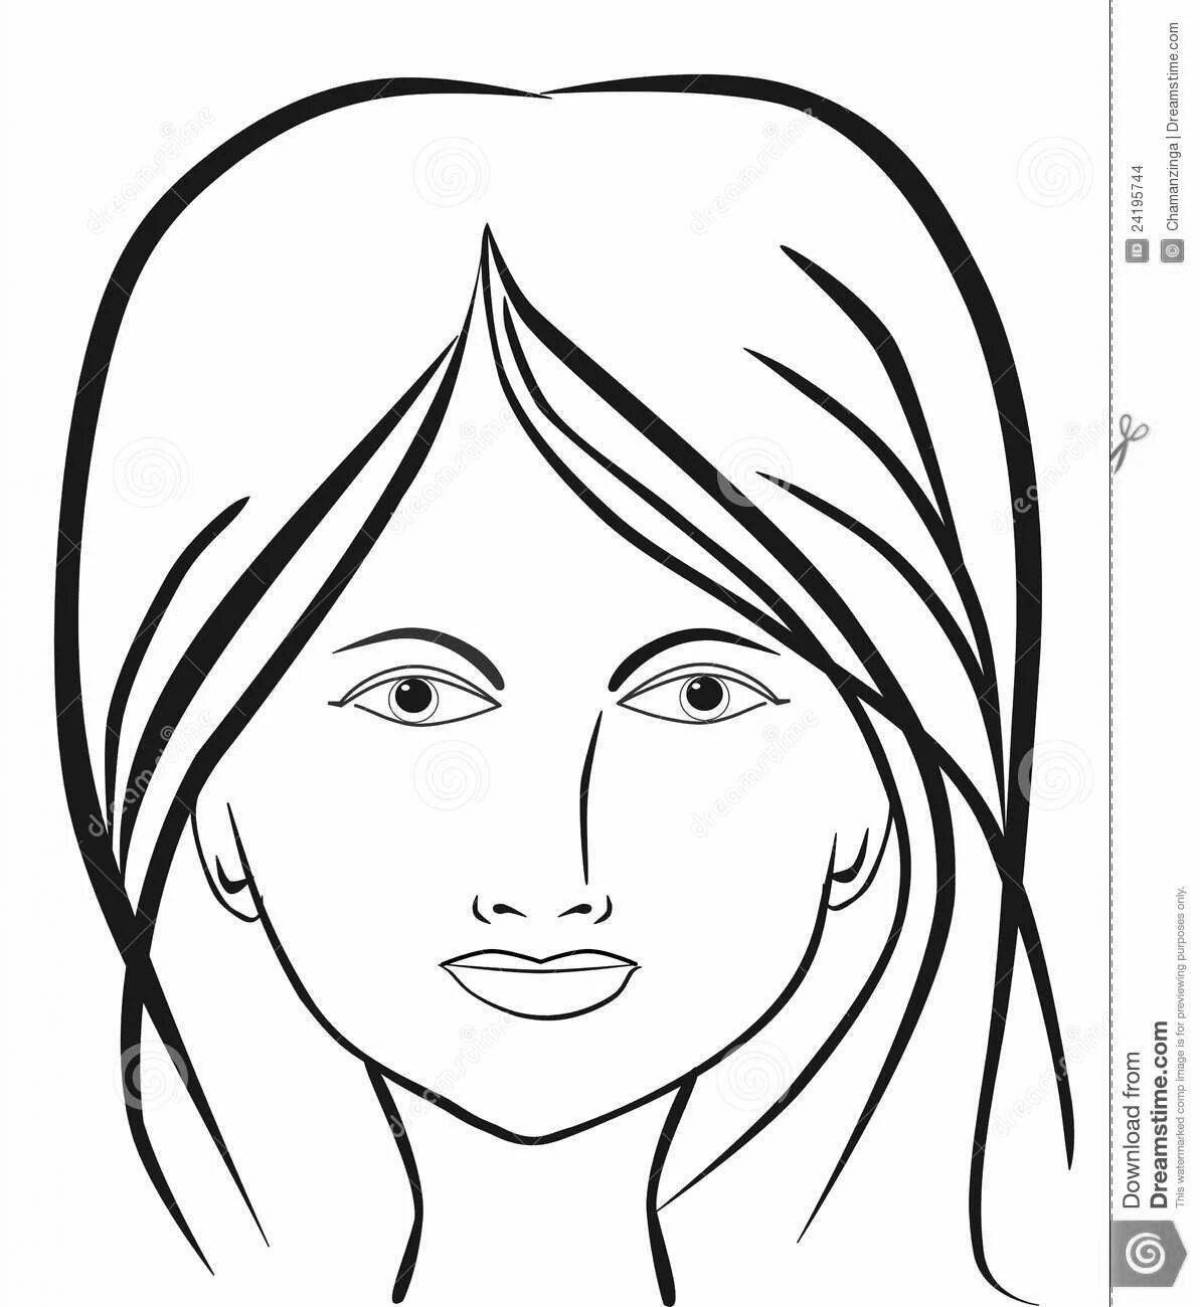 Coloring live female face for children